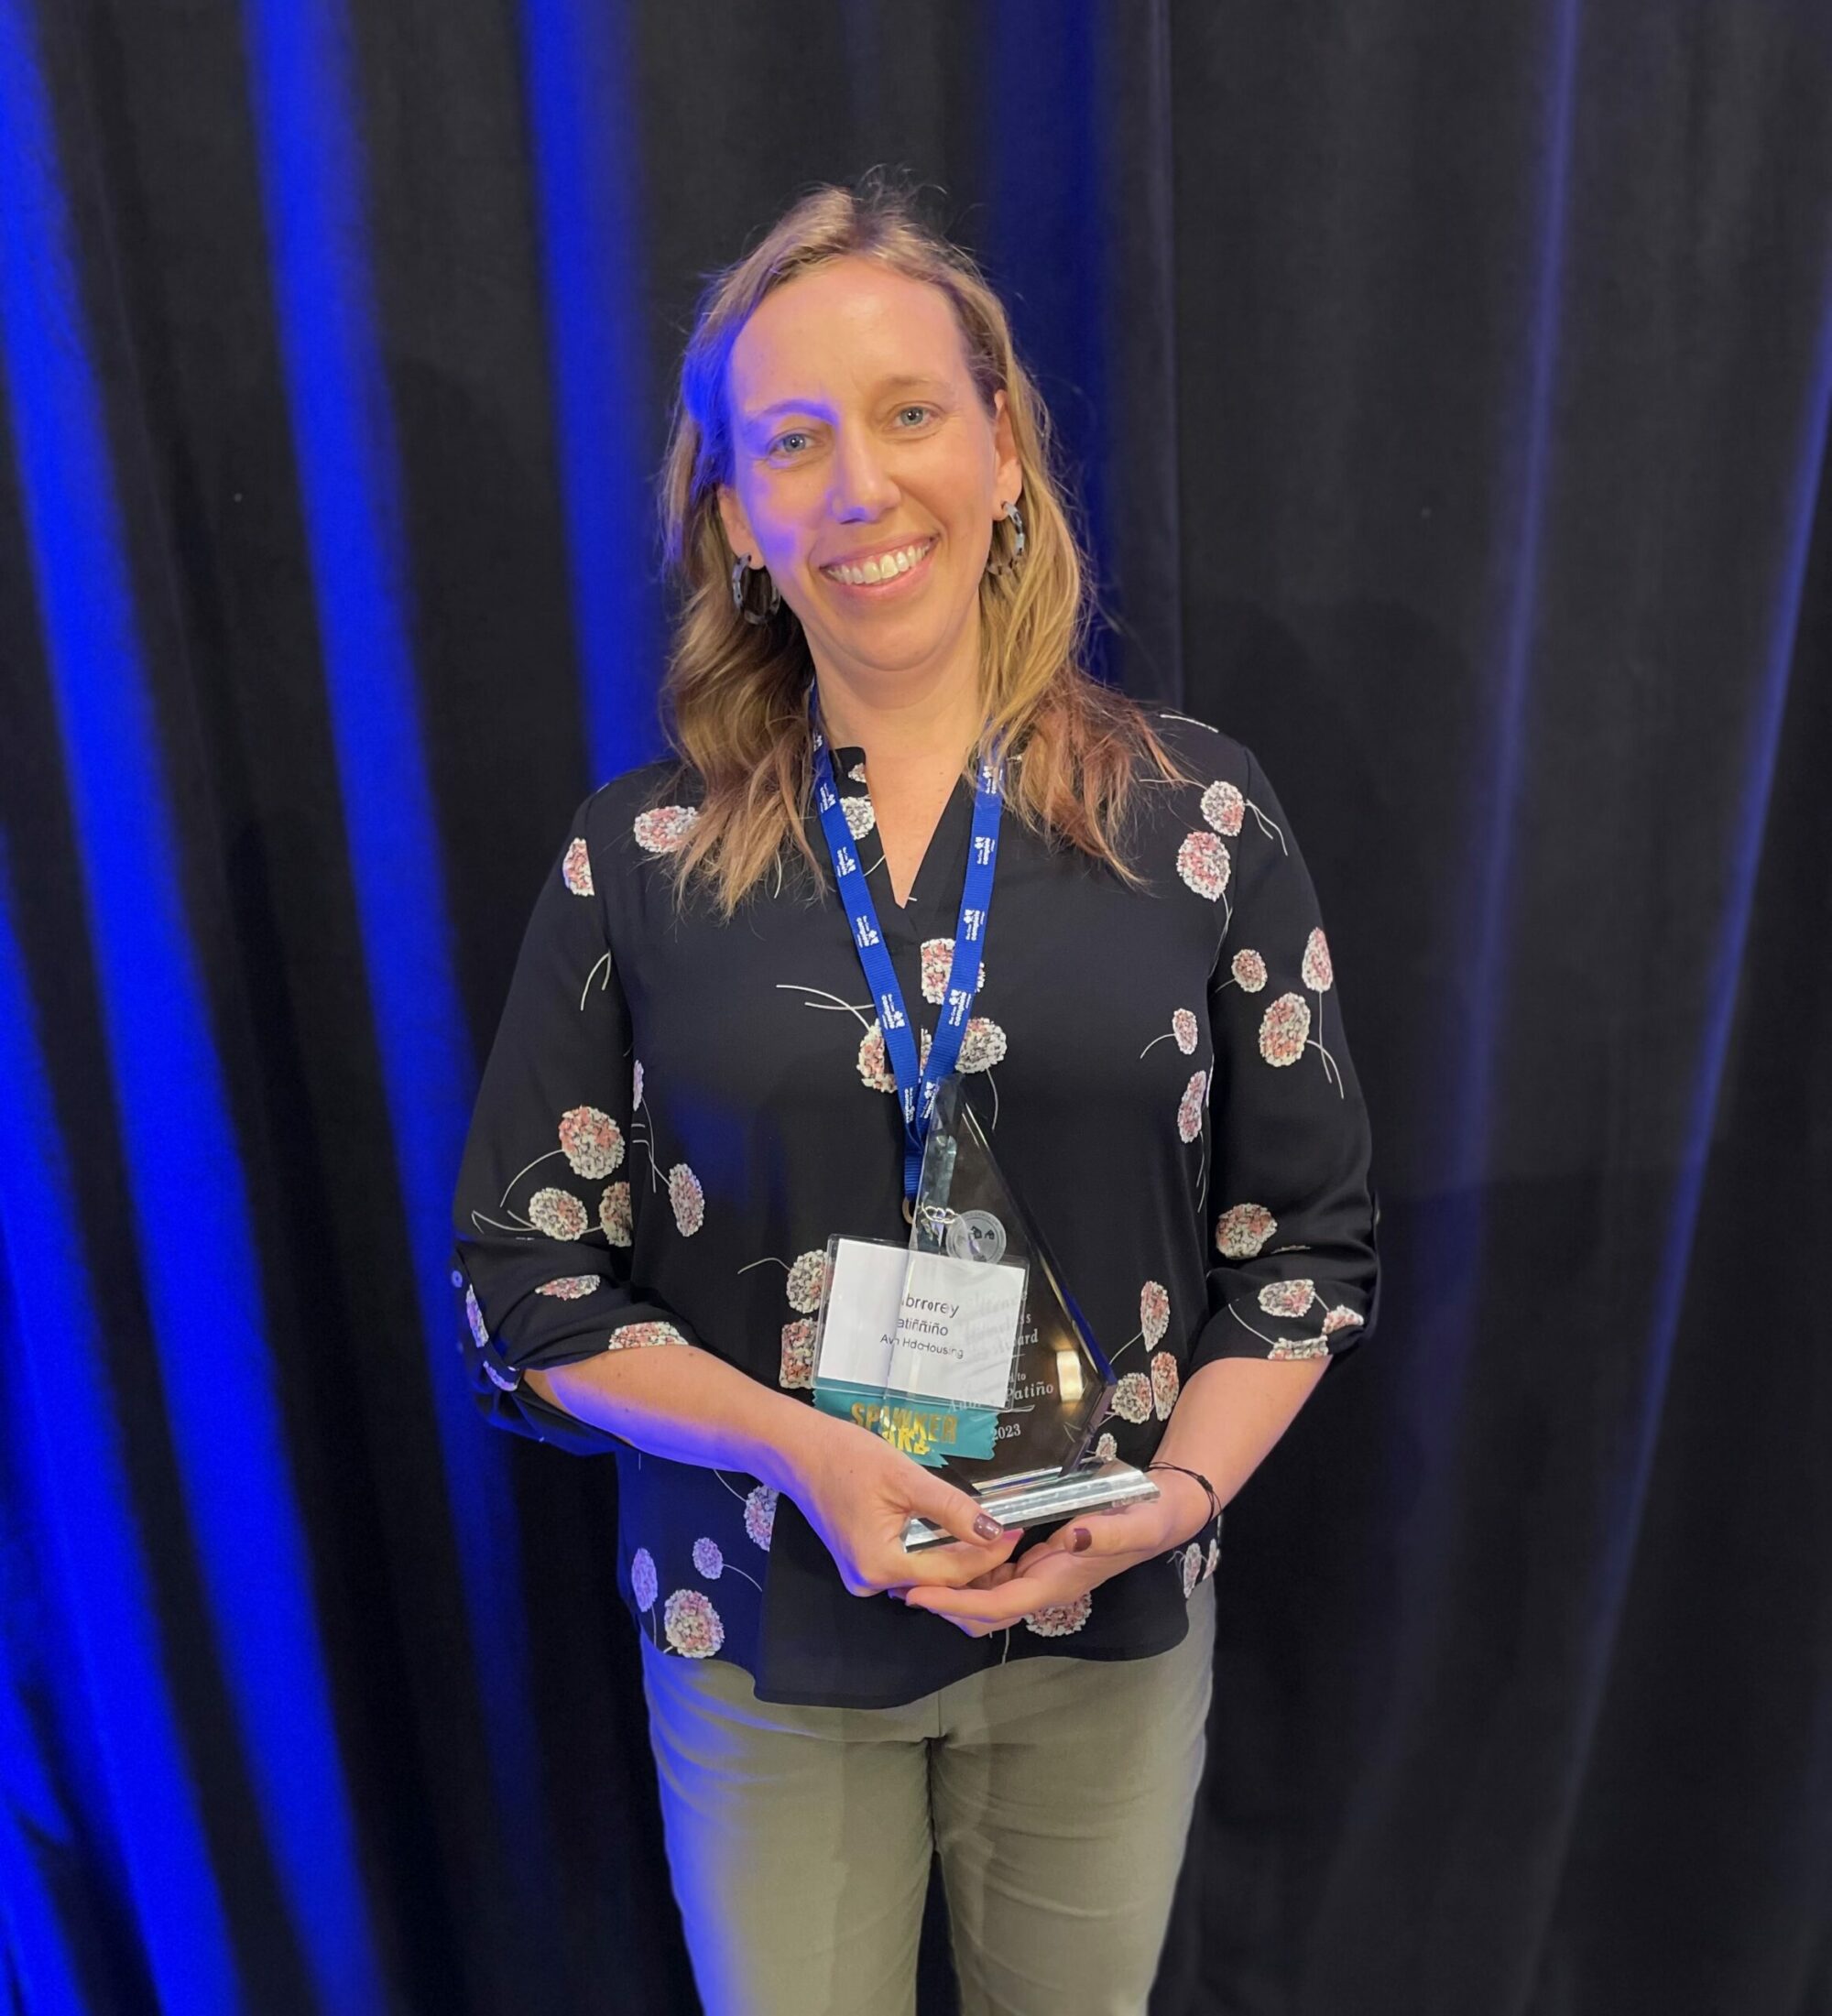 Photo of woman in a dark shirt with flowers, standing in front of a blue curtain, holding an acrylic award, entitled "2023 Excellence in Homeless Services Award"